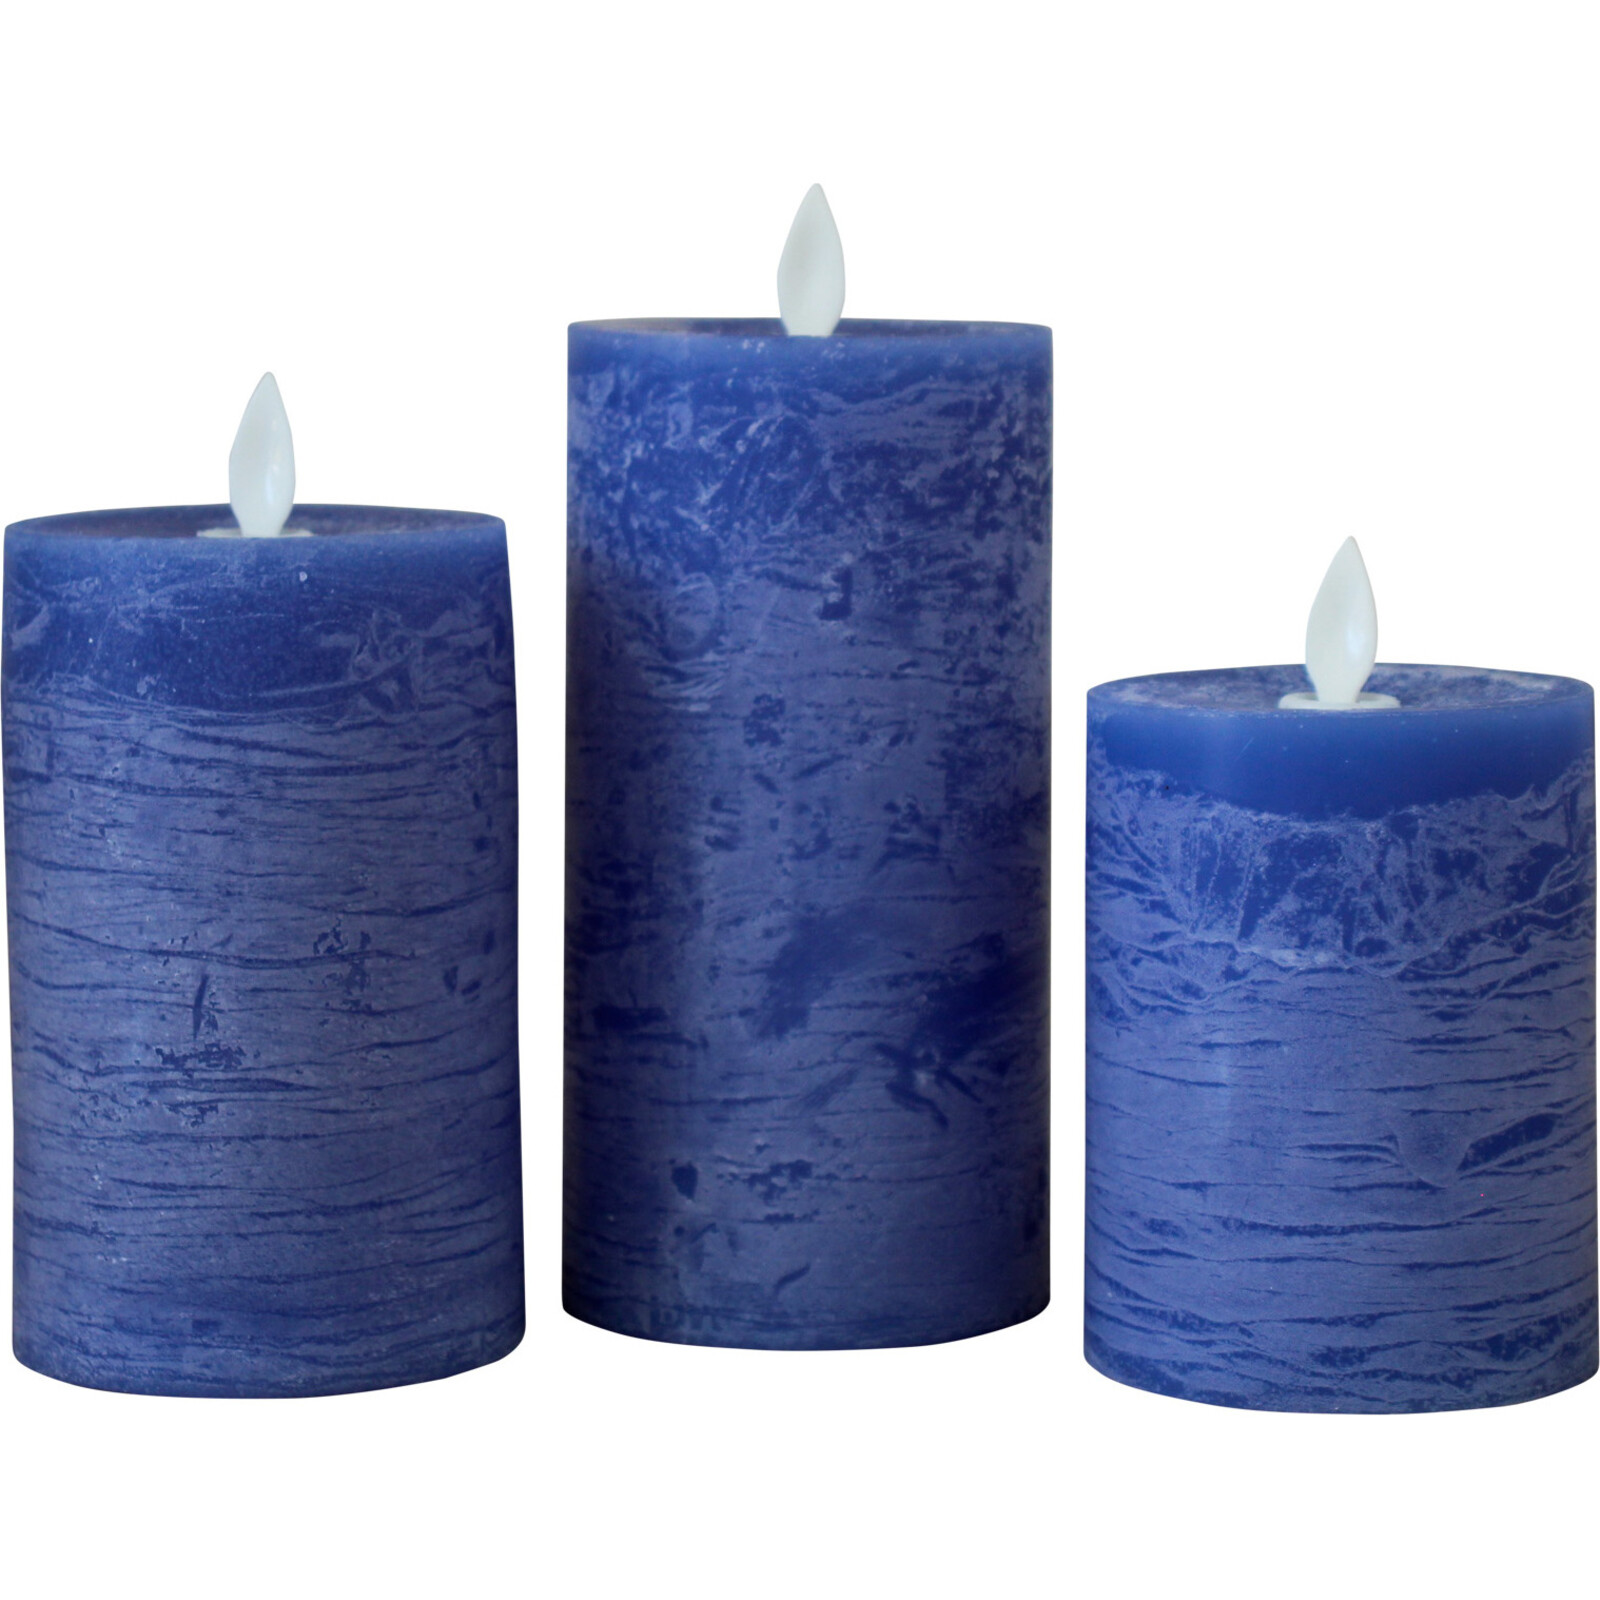 Flameless Candle Navy Sml